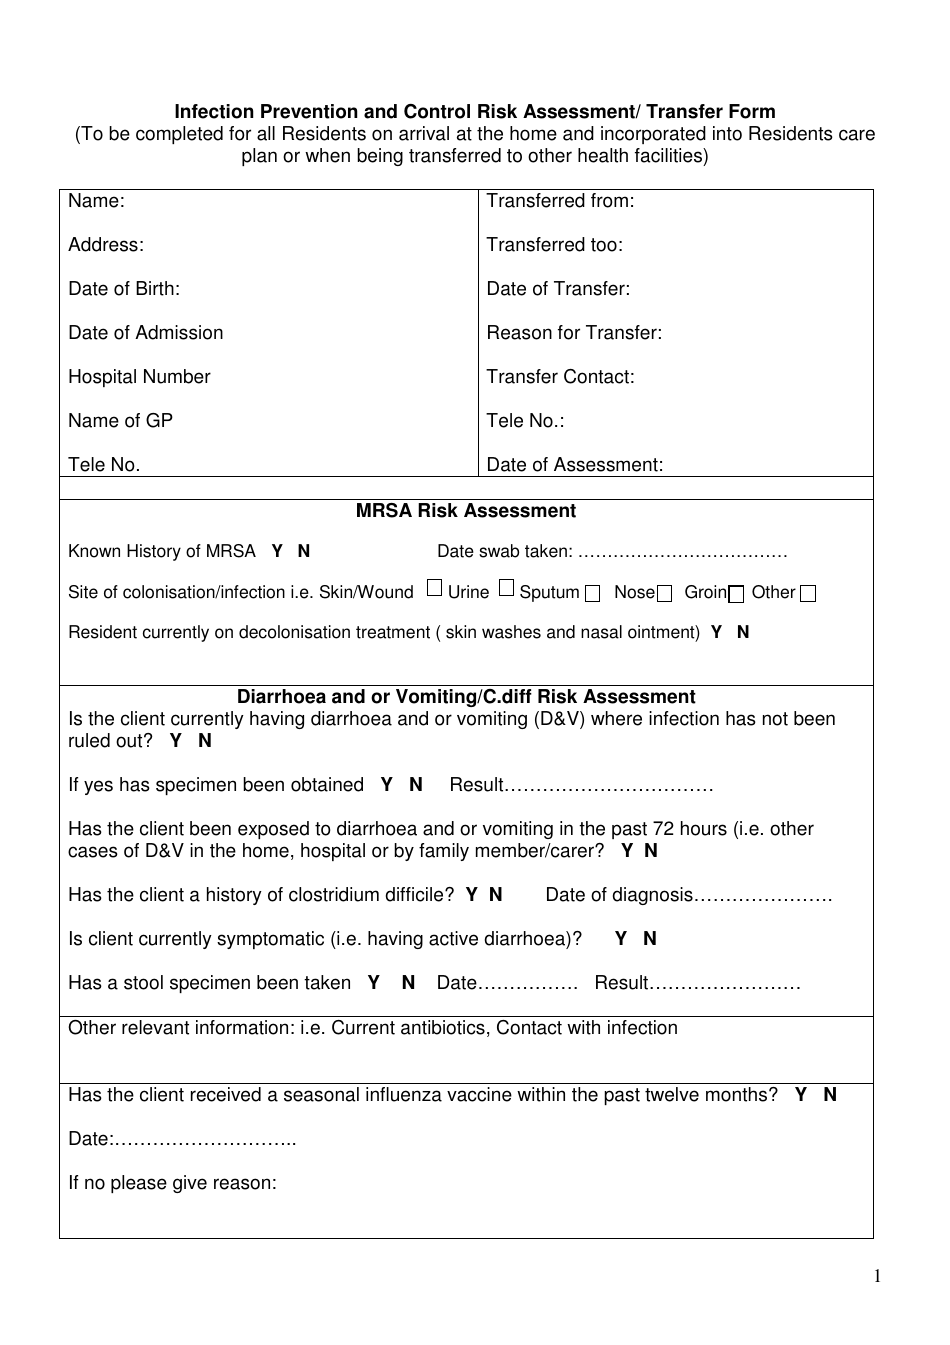 Infection Prevention and Control Risk Assessment / Transfer Form, Page 1